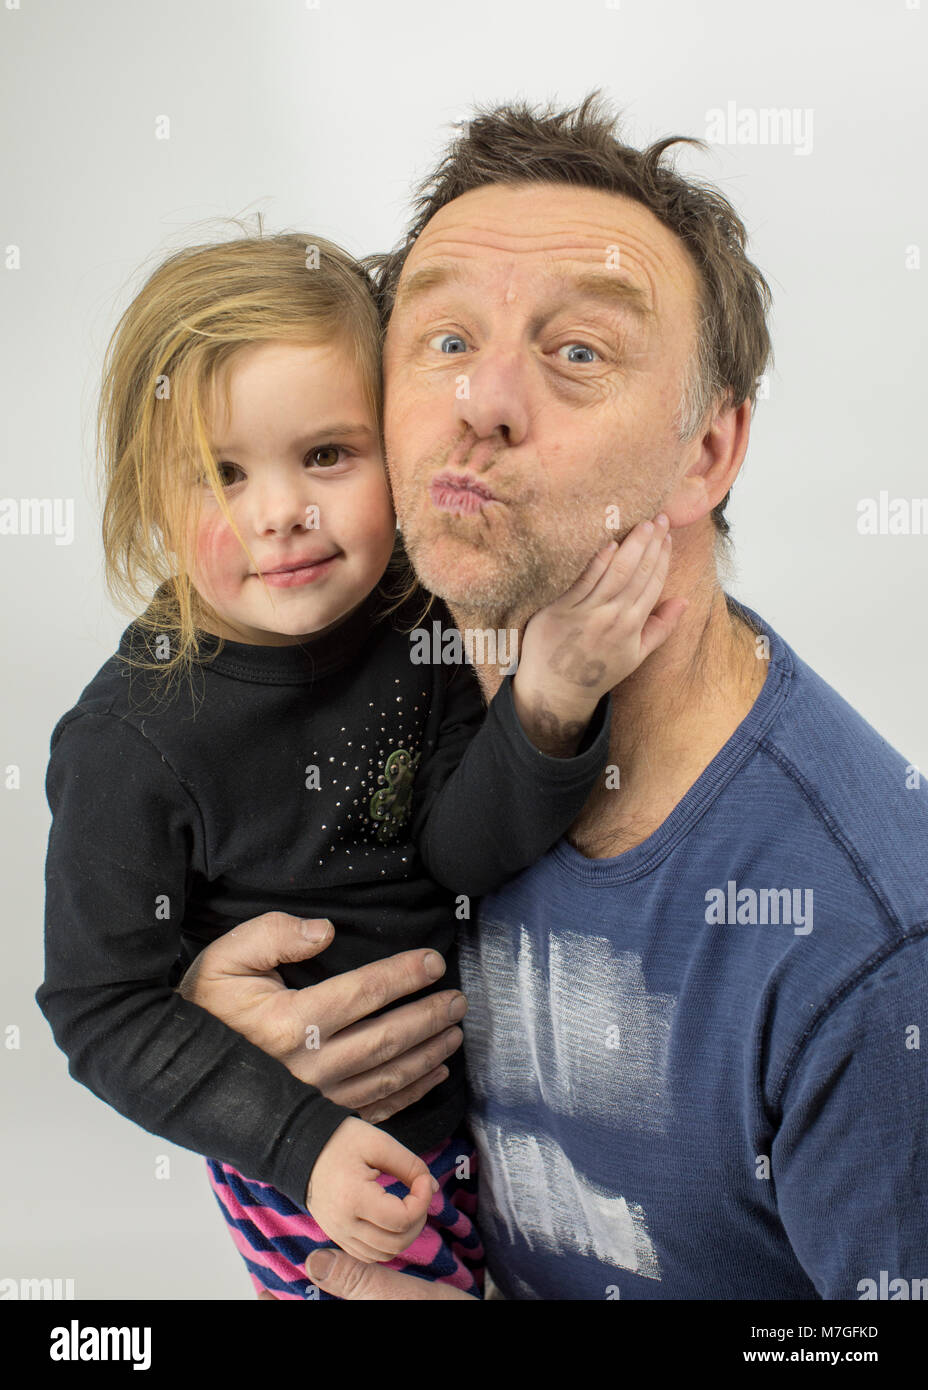 Dad and daughter making funny faces in studio Stock Photo